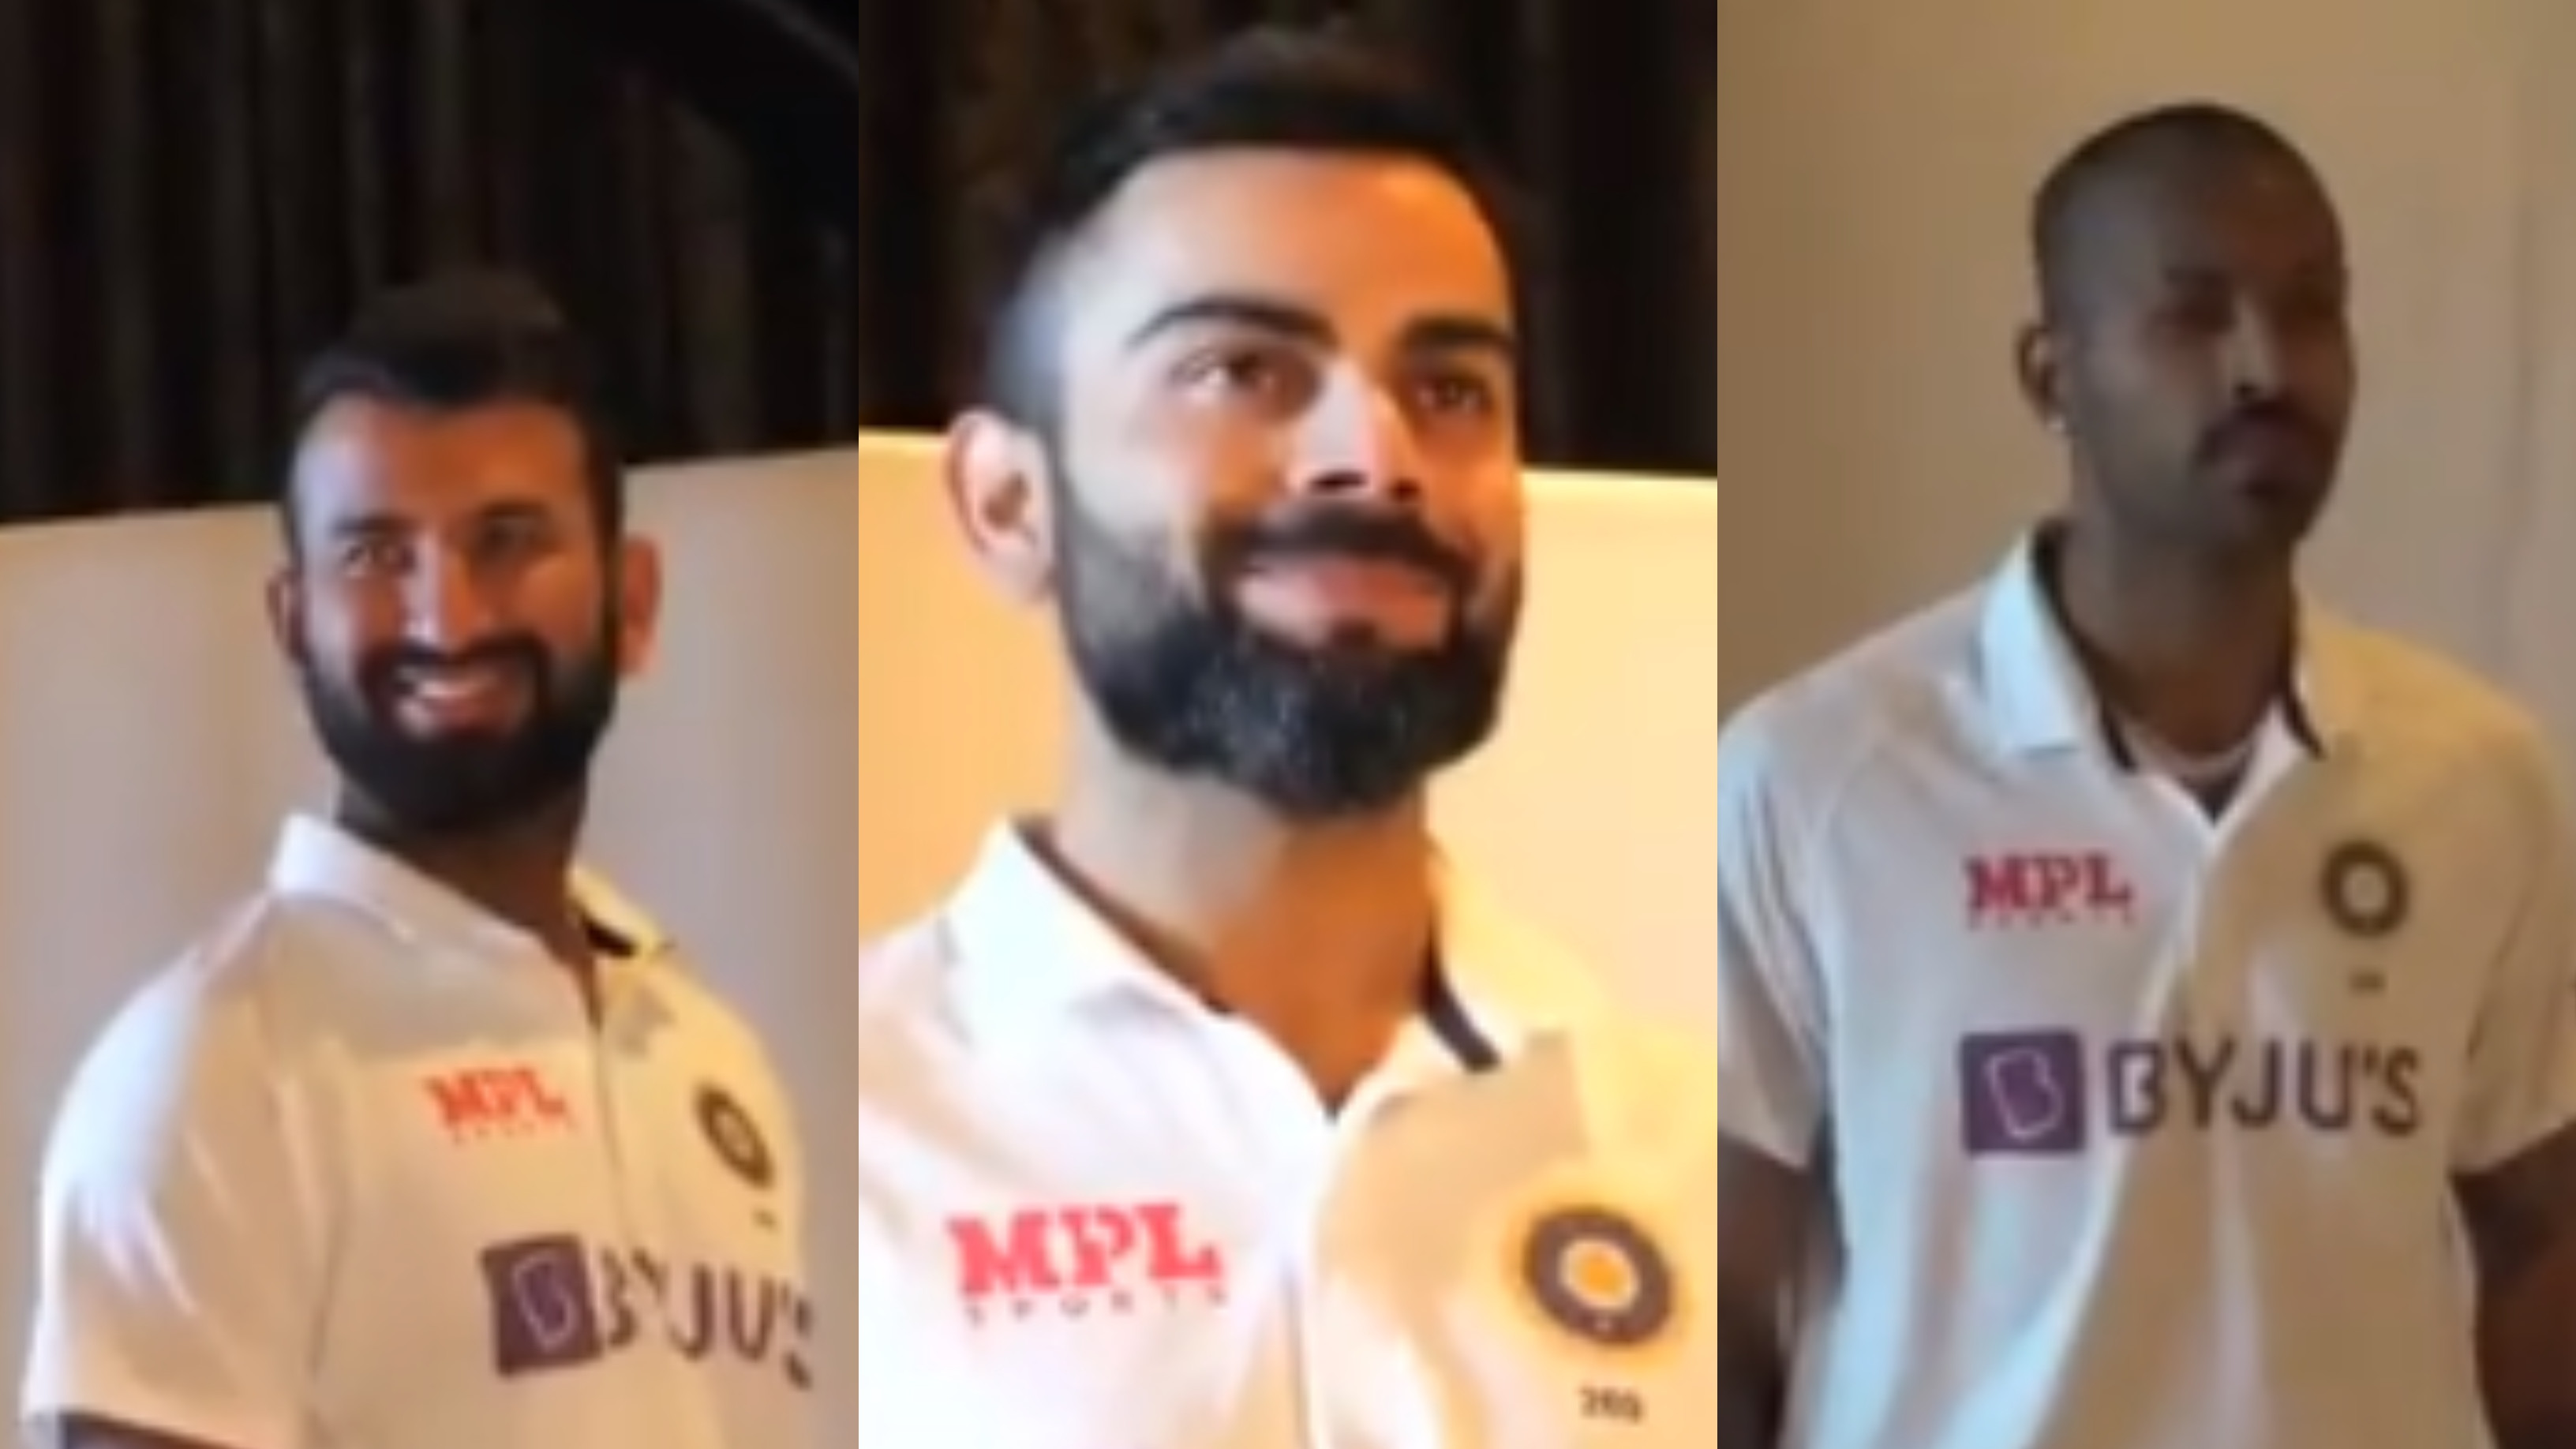 IND v ENG 2021: WATCH - Team India's fun photoshoot in whites ahead of the 1st Test